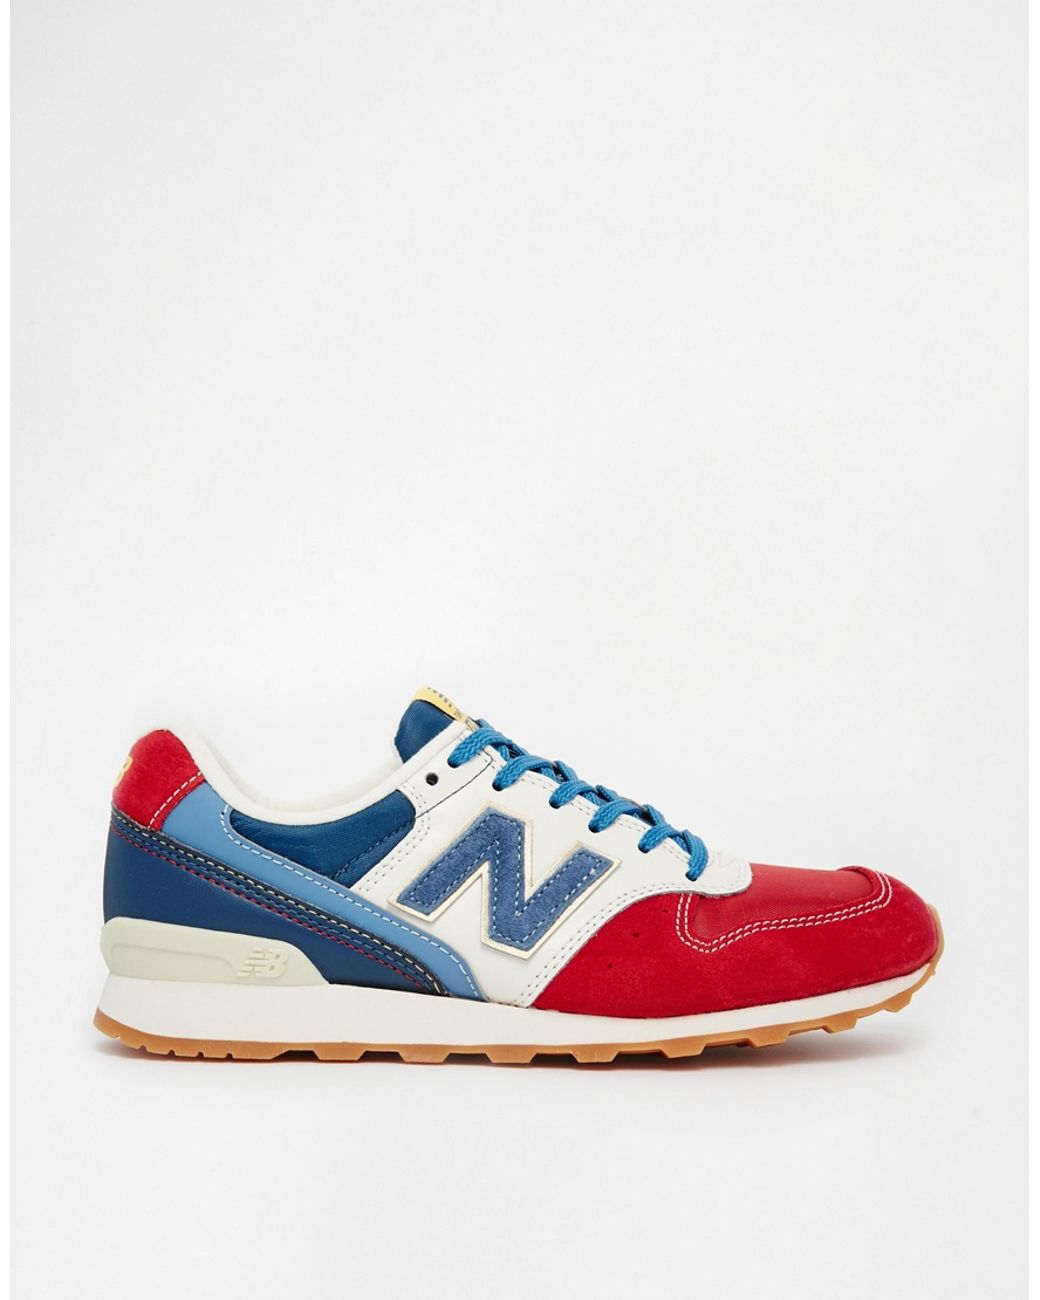 Red White And Blue New Balance Cleats Top Sellers | bellvalefarms.com